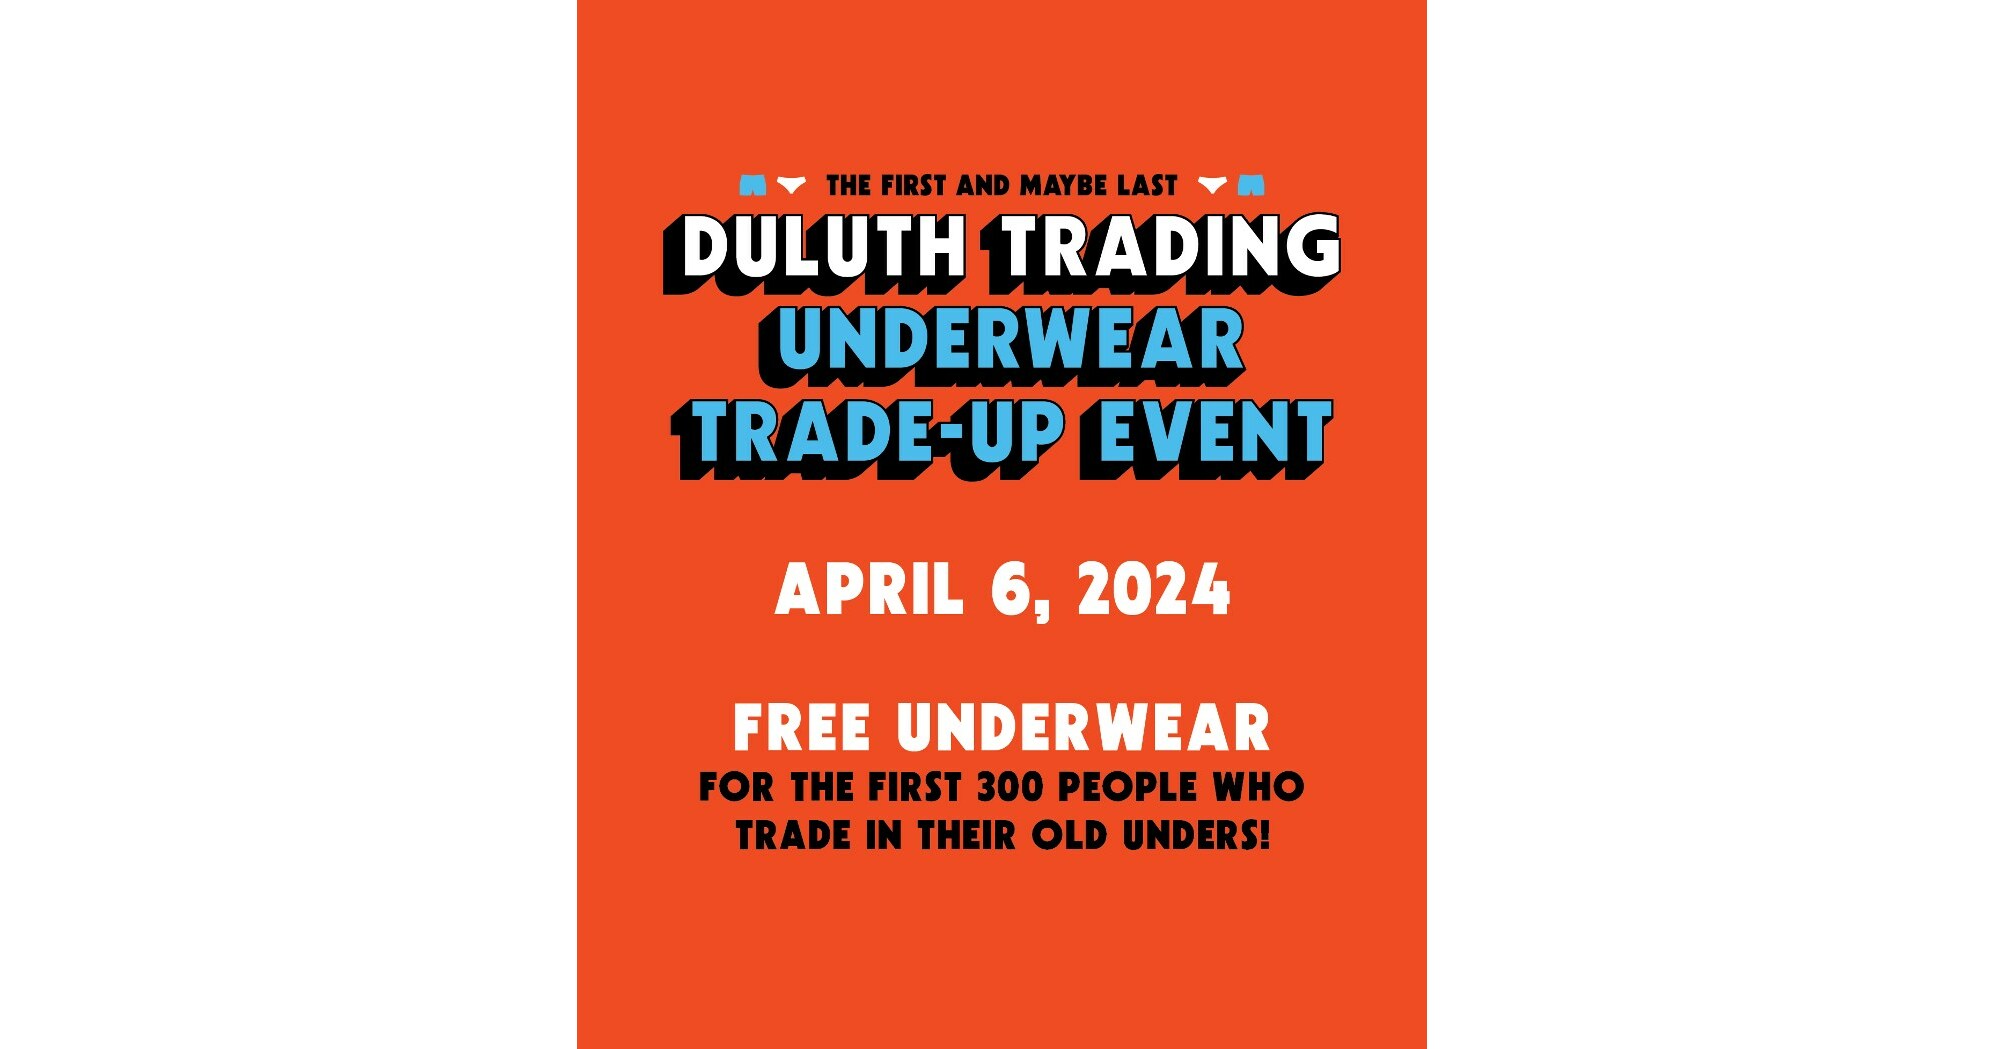 If Your Feel Restricted By Your Garments, It's Not Duluth Trading's Fault -  Adpulp